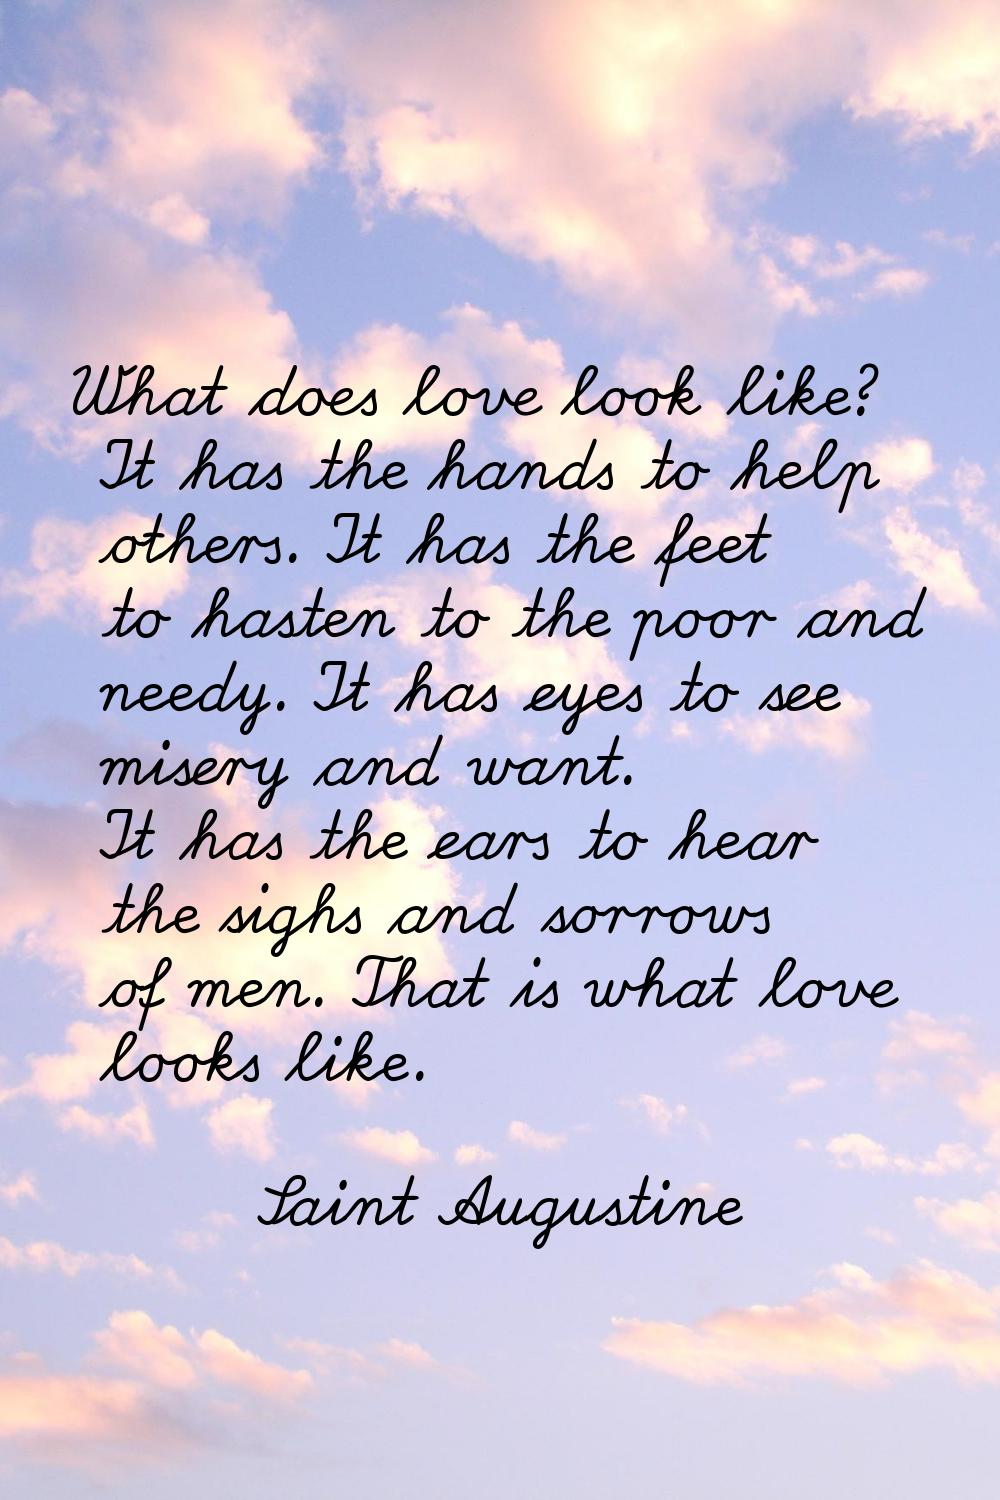 What does love look like? It has the hands to help others. It has the feet to hasten to the poor an